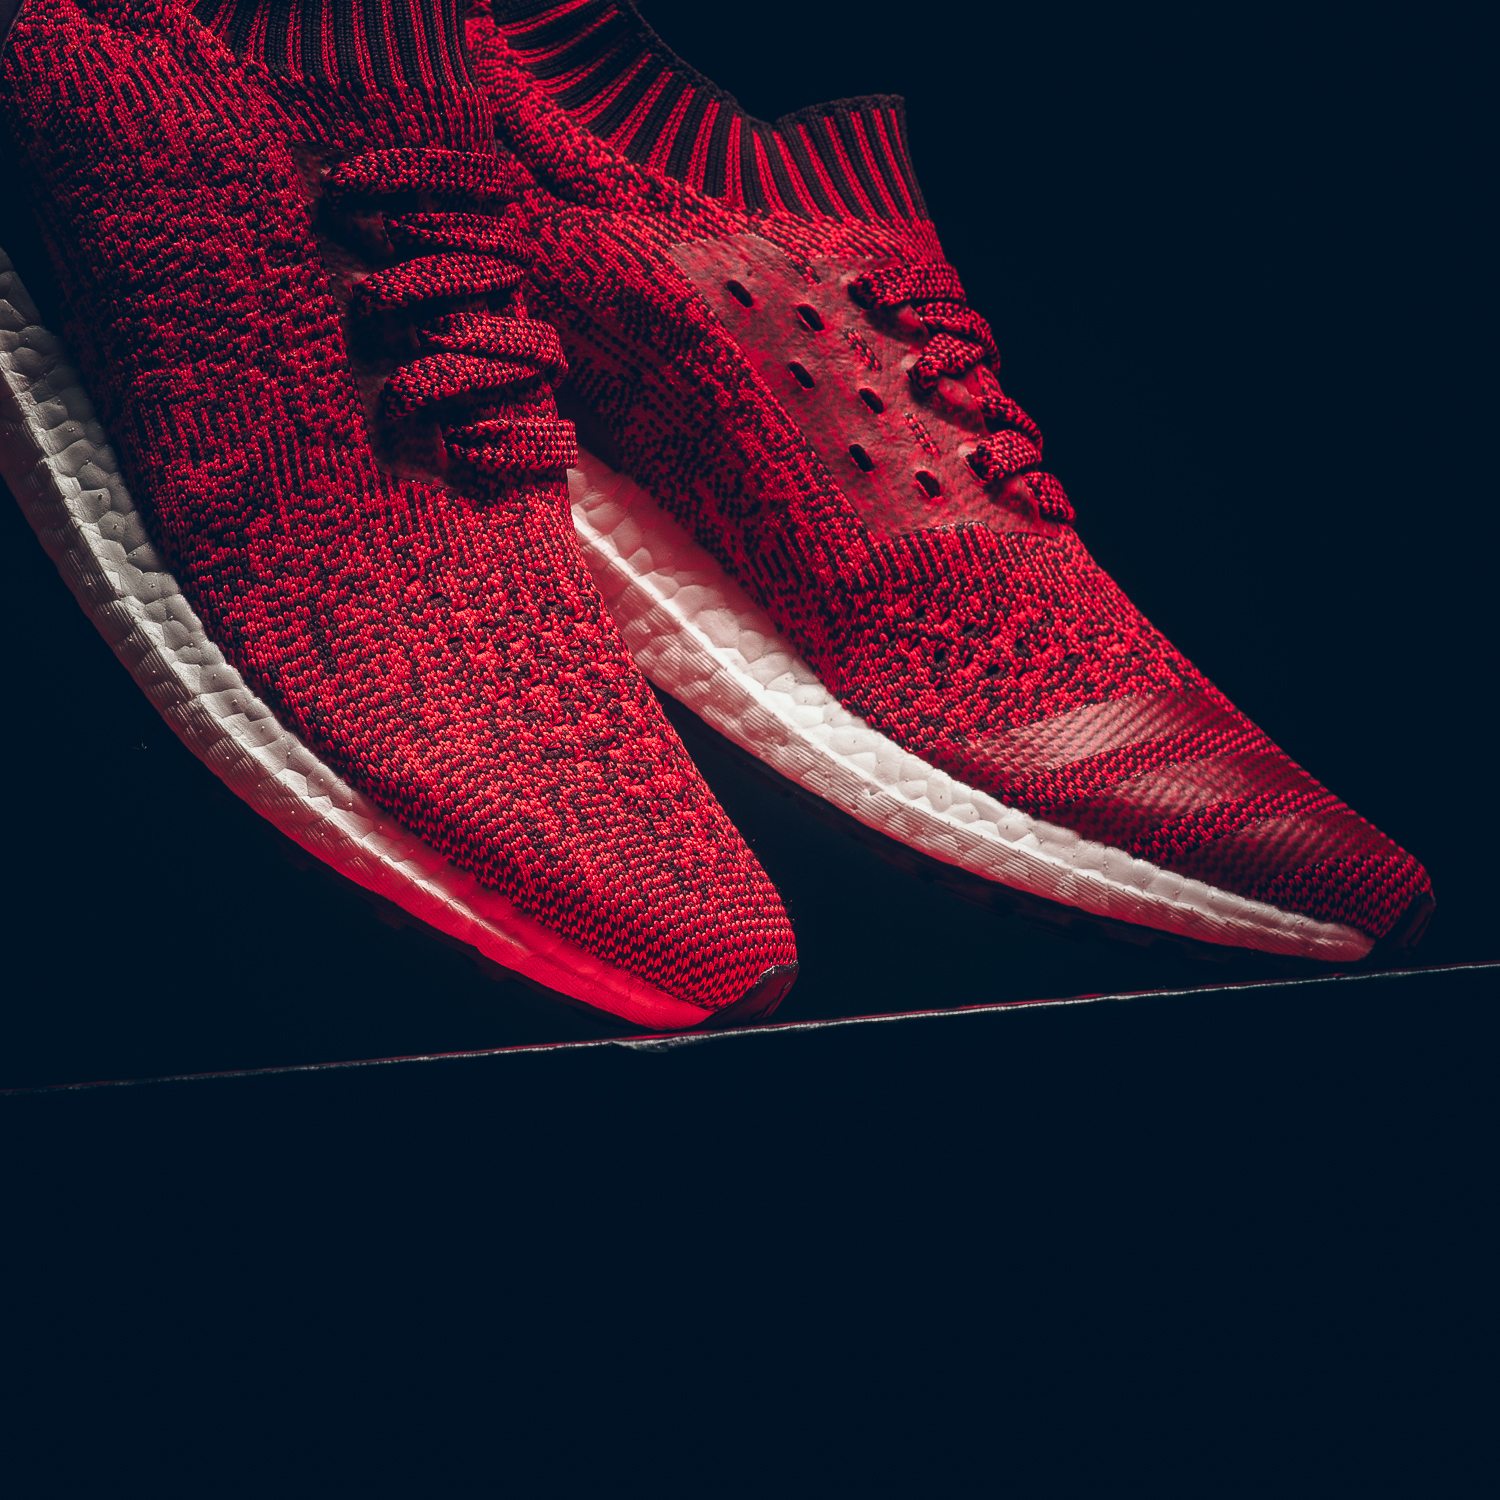 pure boost tactile red